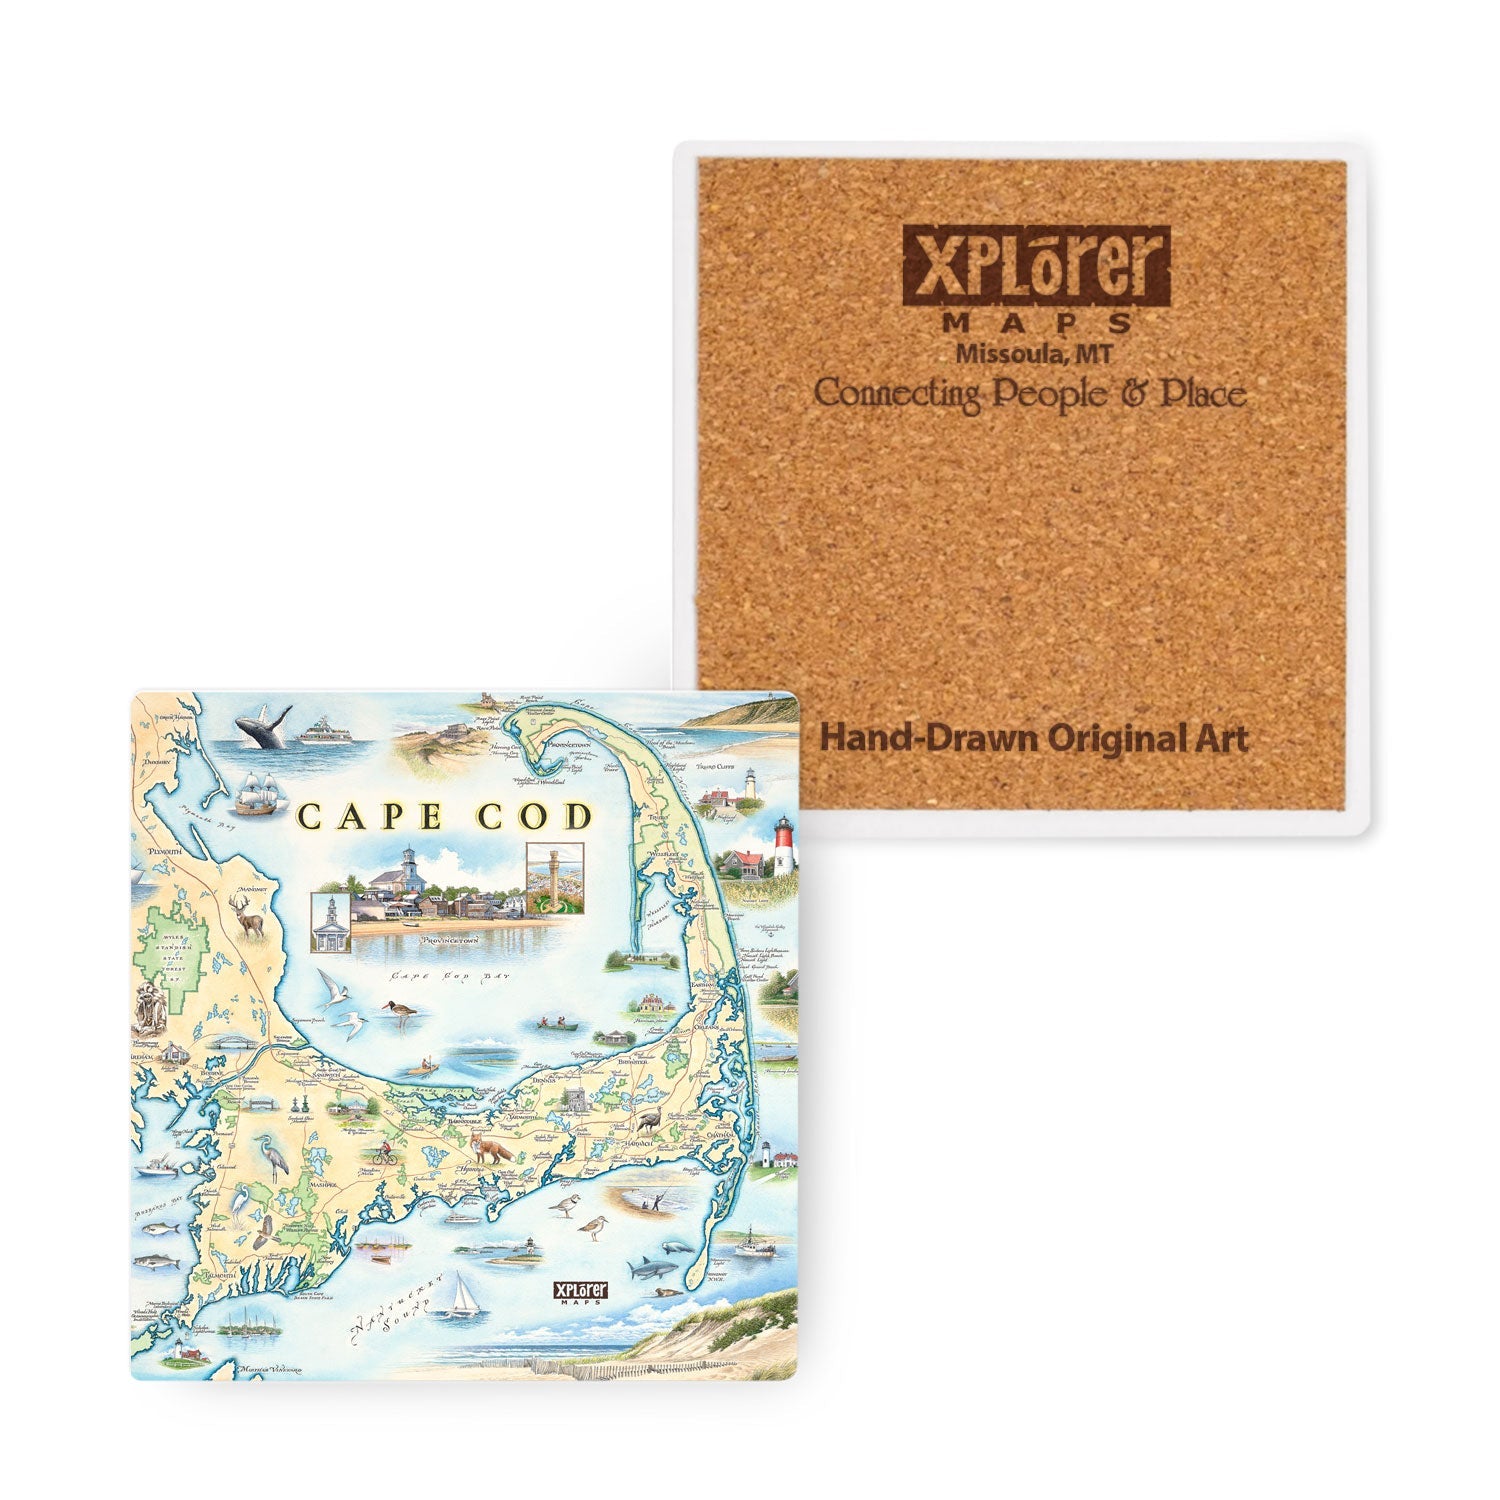 Massachusetts' Cape Cod Map ceramic coasters in earth tone colors of blues and beiges. Featuring Plymouth Rock, fish, crane, fox, Provincetown, canoeing, biking, beach, and ocean.